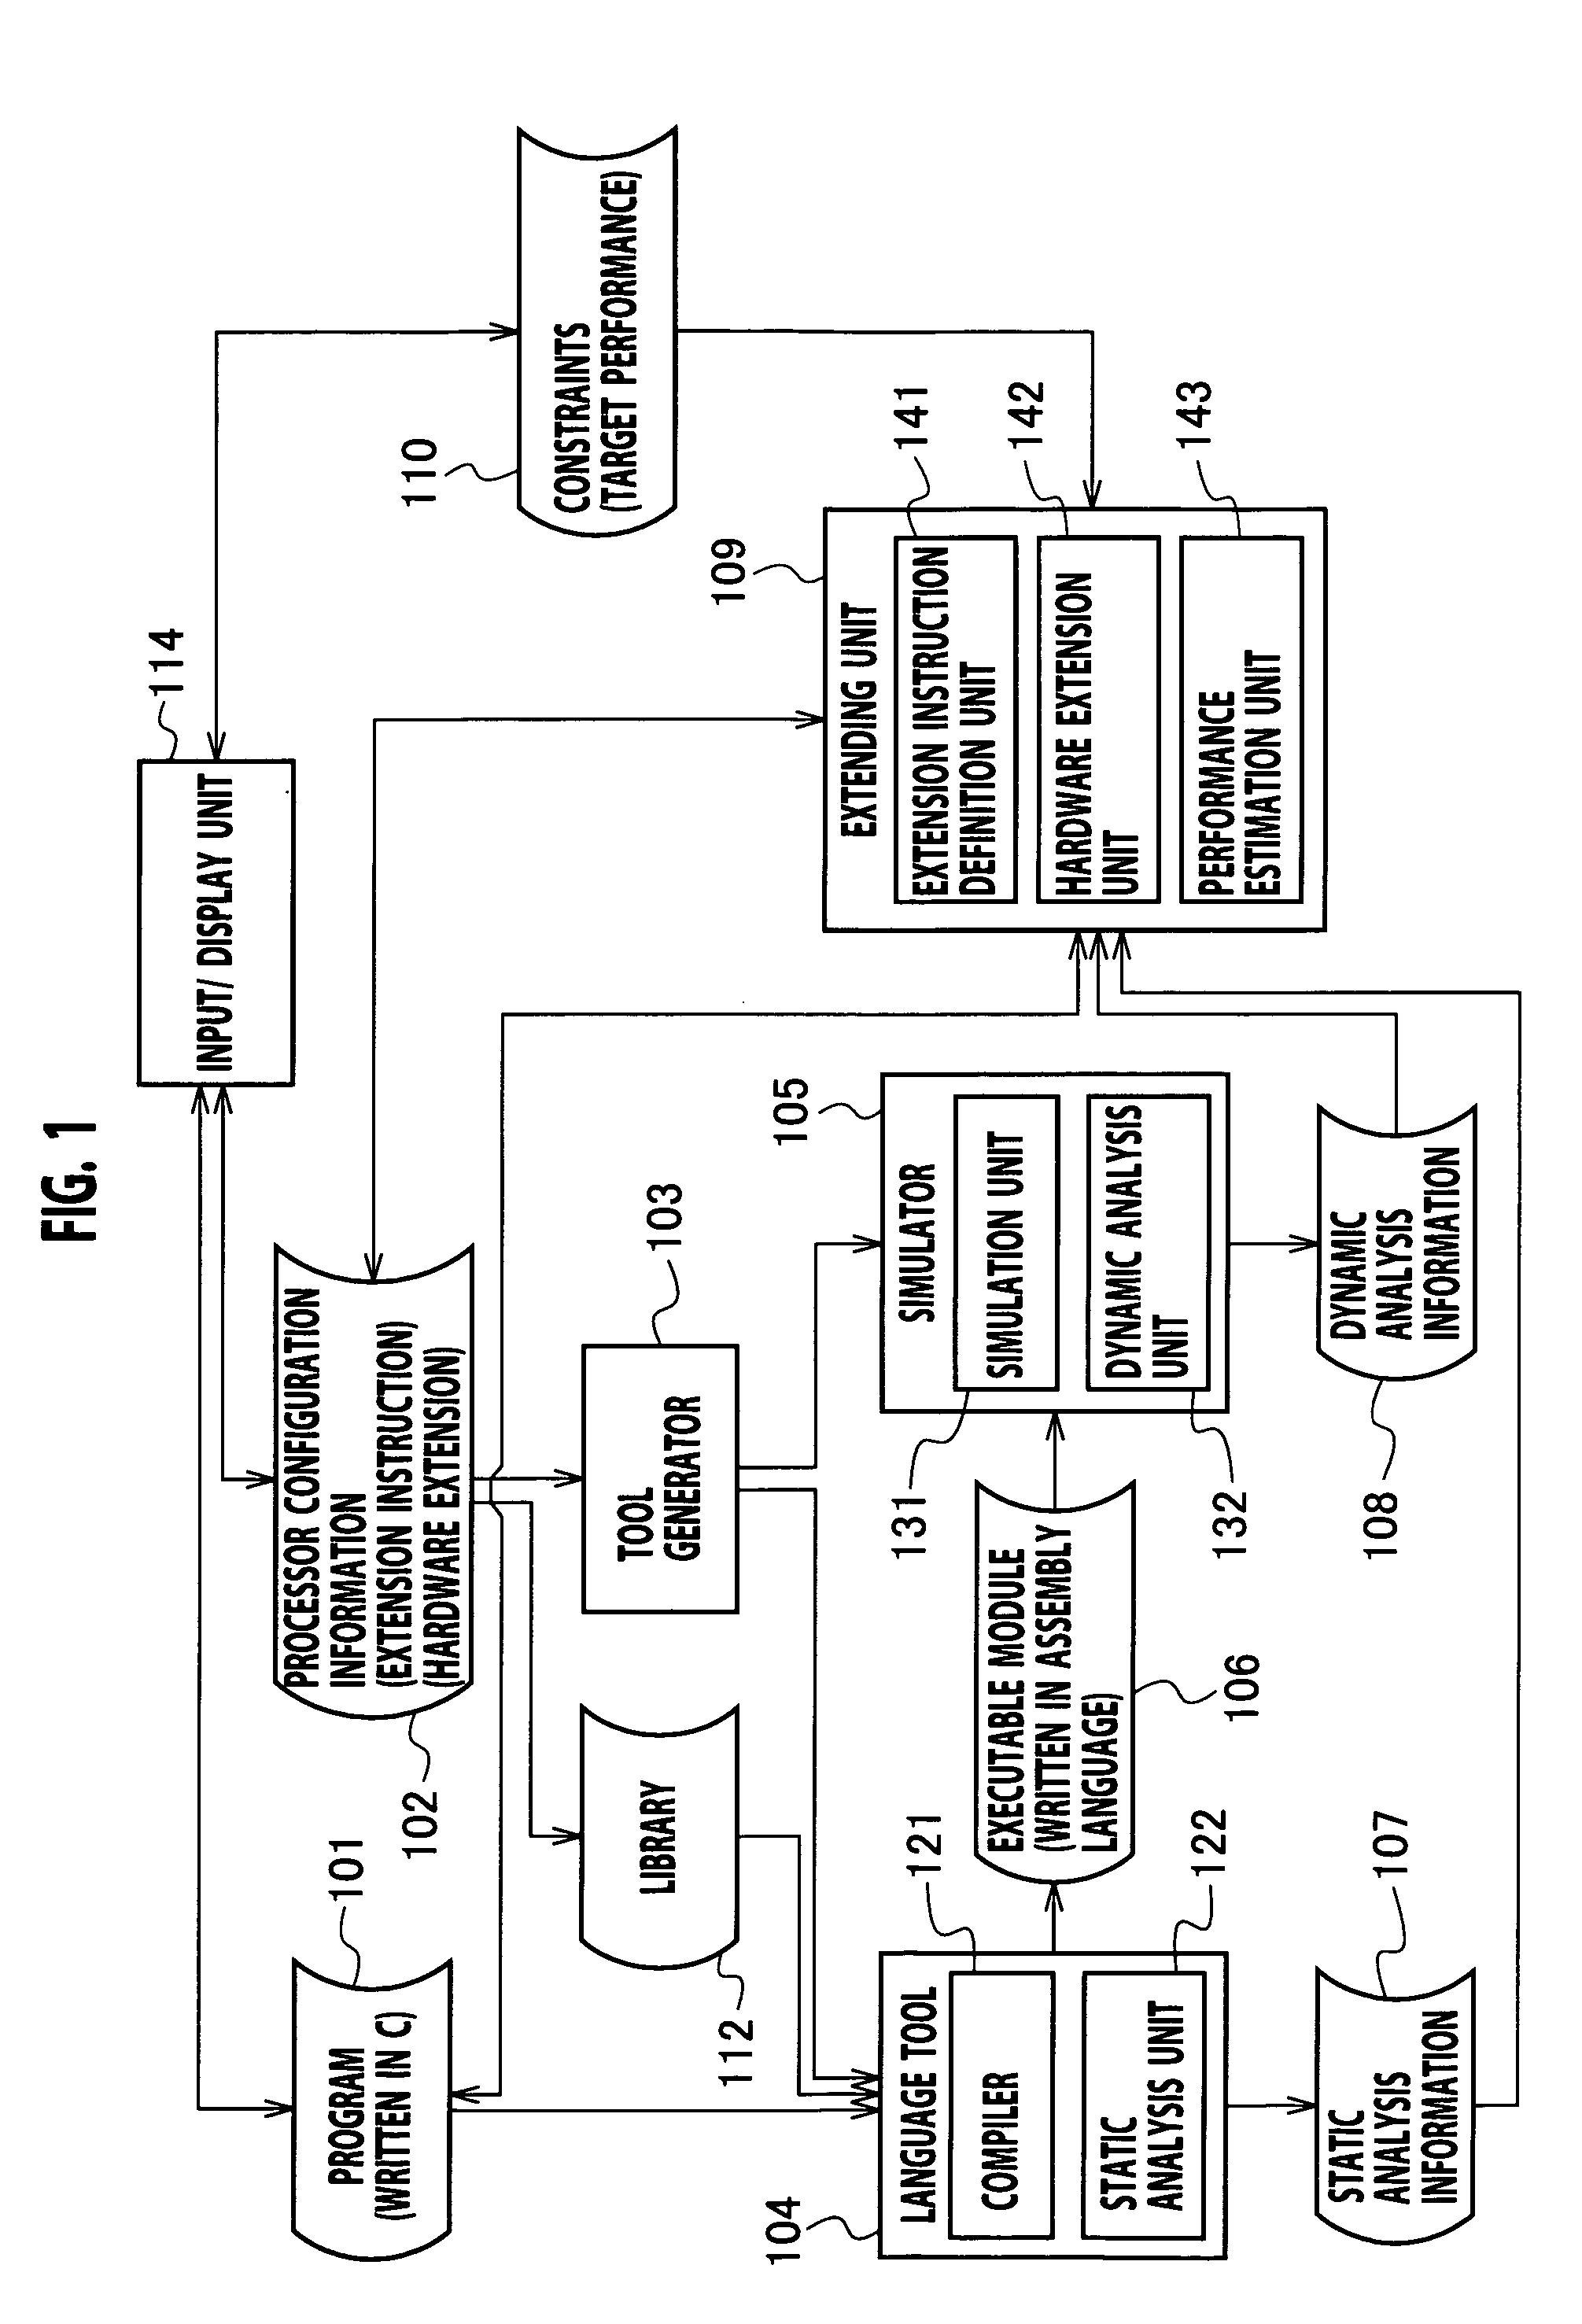 Configurable processor design apparatus and design method, library optimization method, processor, and fabrication method for semiconductor device including processor